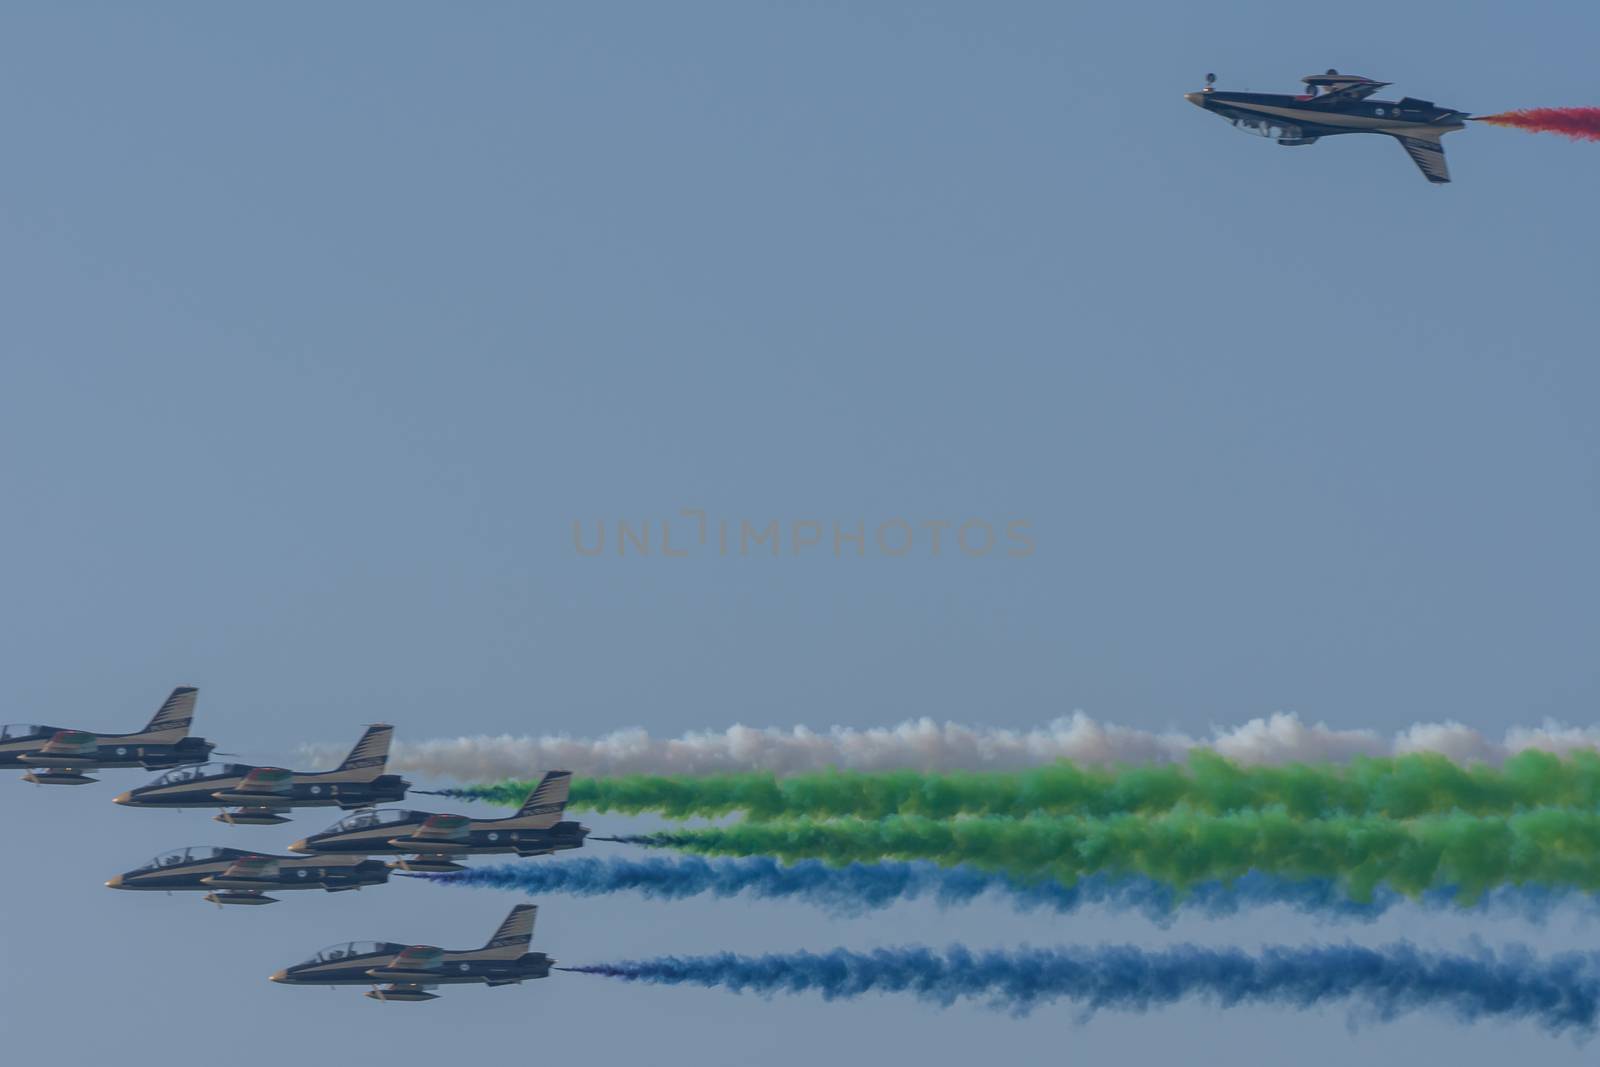 UAE Largest Military Union Fortress 7 Show in Umm al Quwain with by kingmaphotos